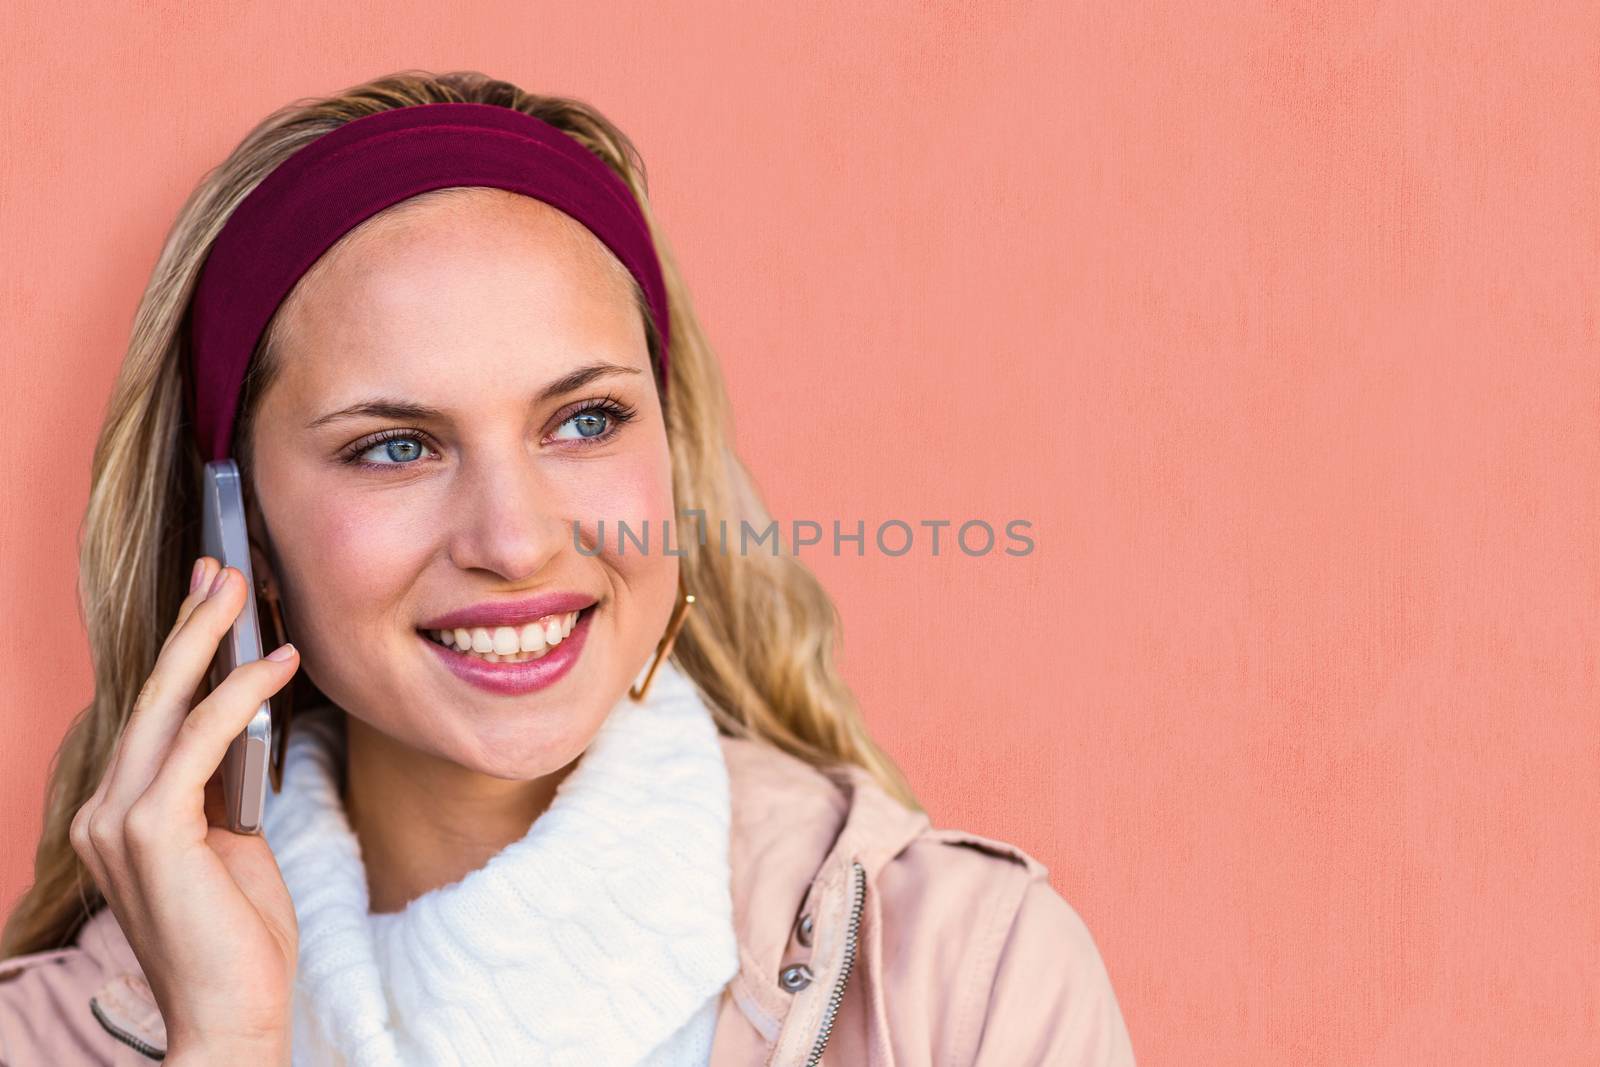 Smiling woman phoning with smartphone against white background